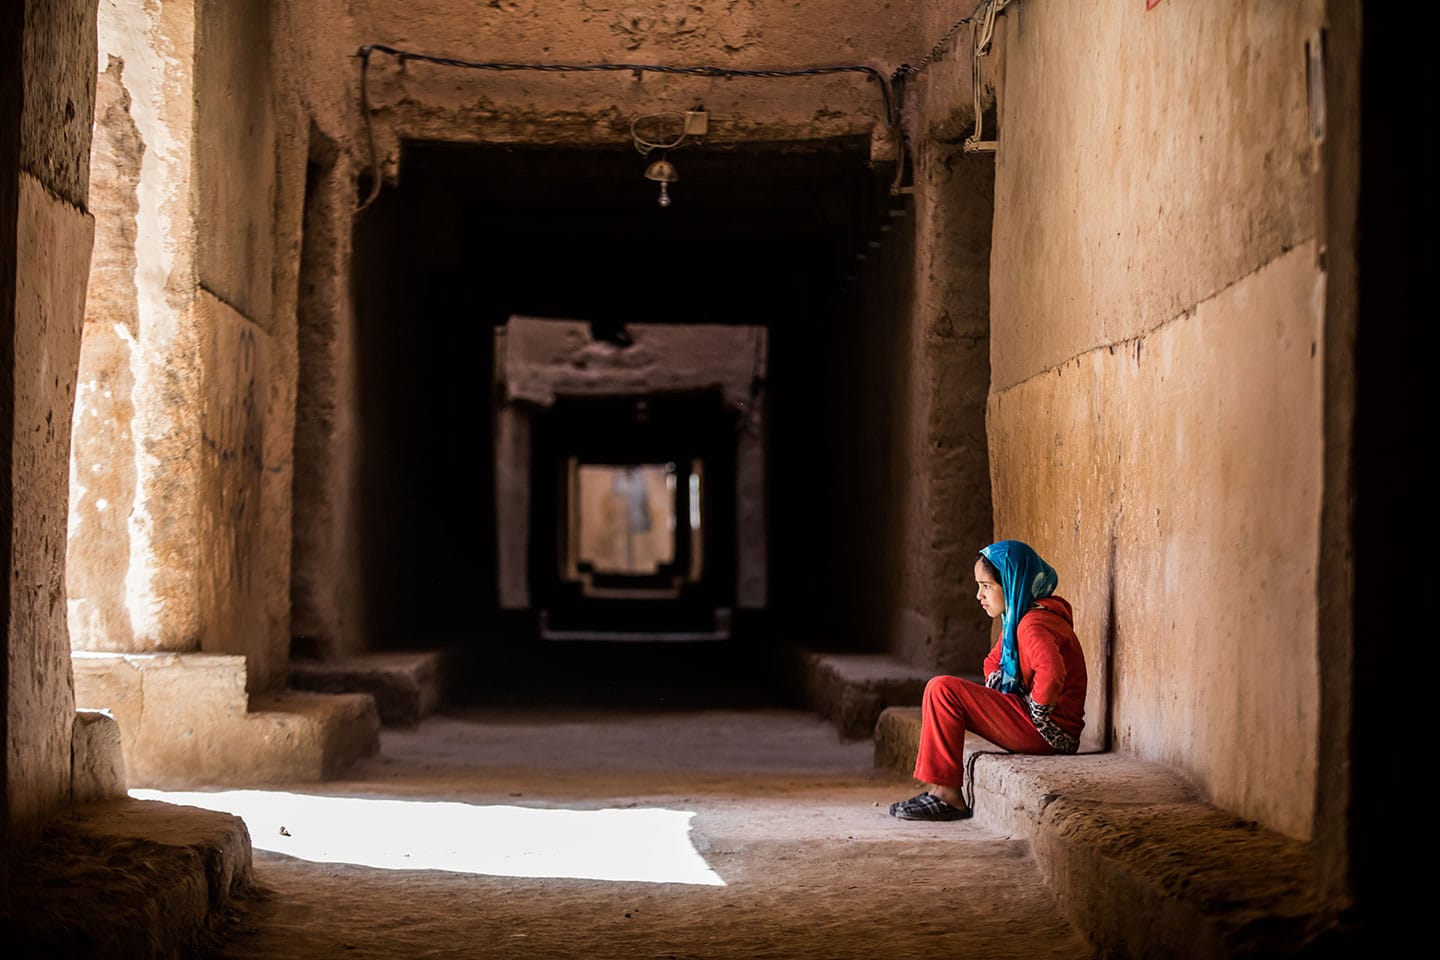 The tunnels of Tinejdad, Morocco